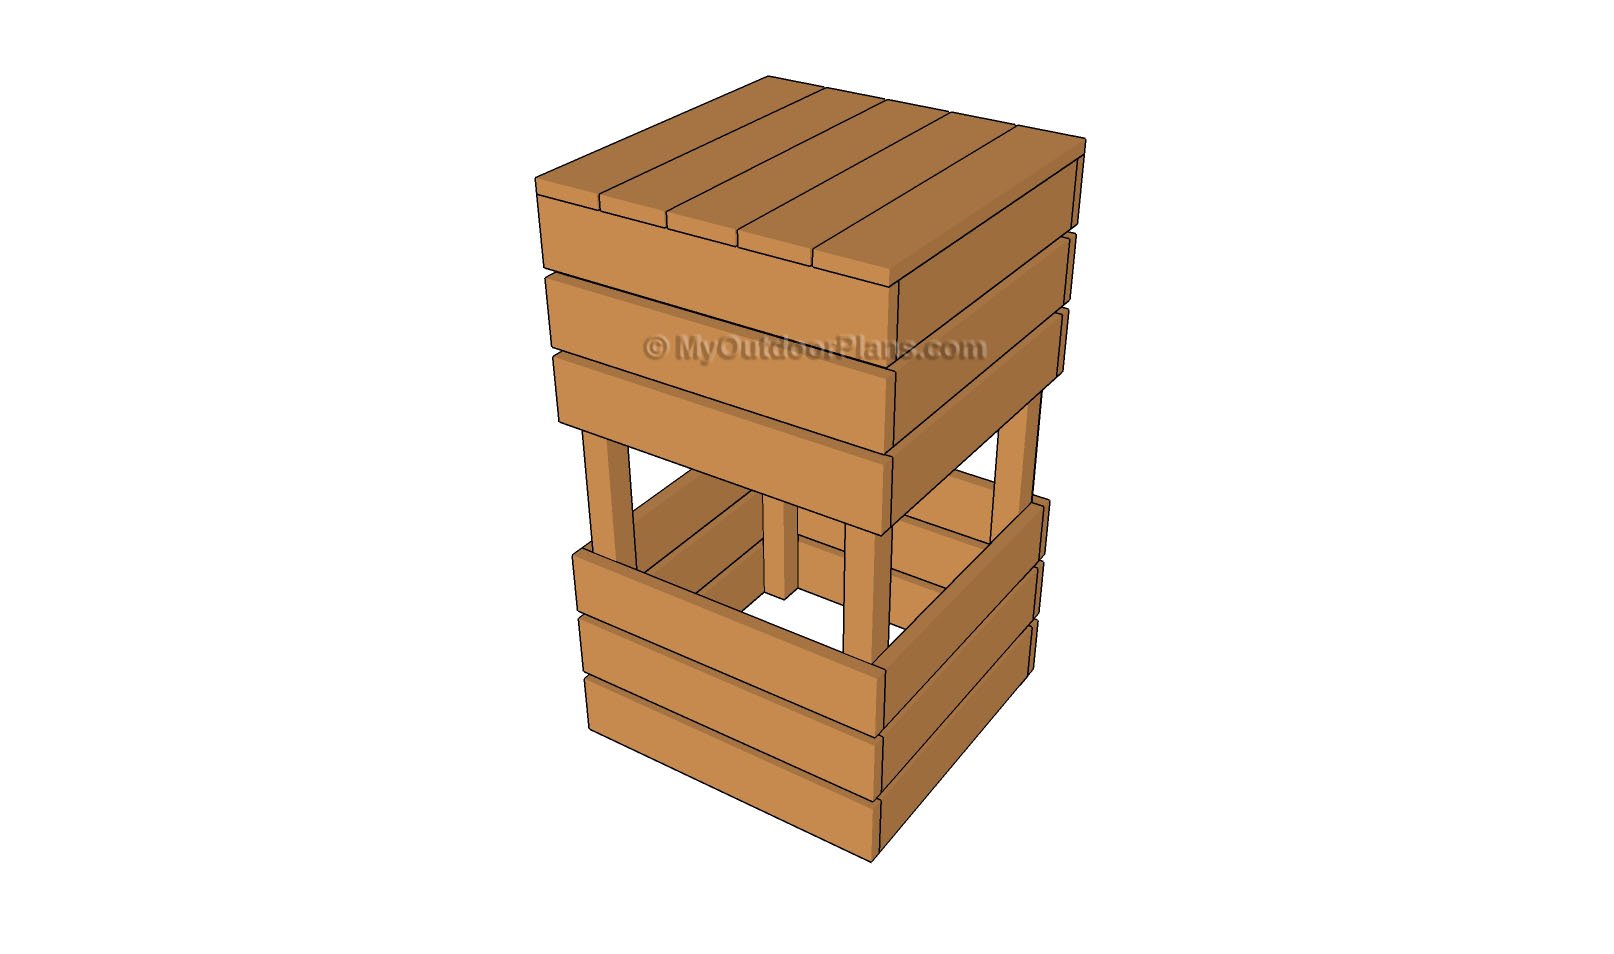 Bar Stool Plans  Free Outdoor Plans - DIY Shed, Wooden Playhouse 